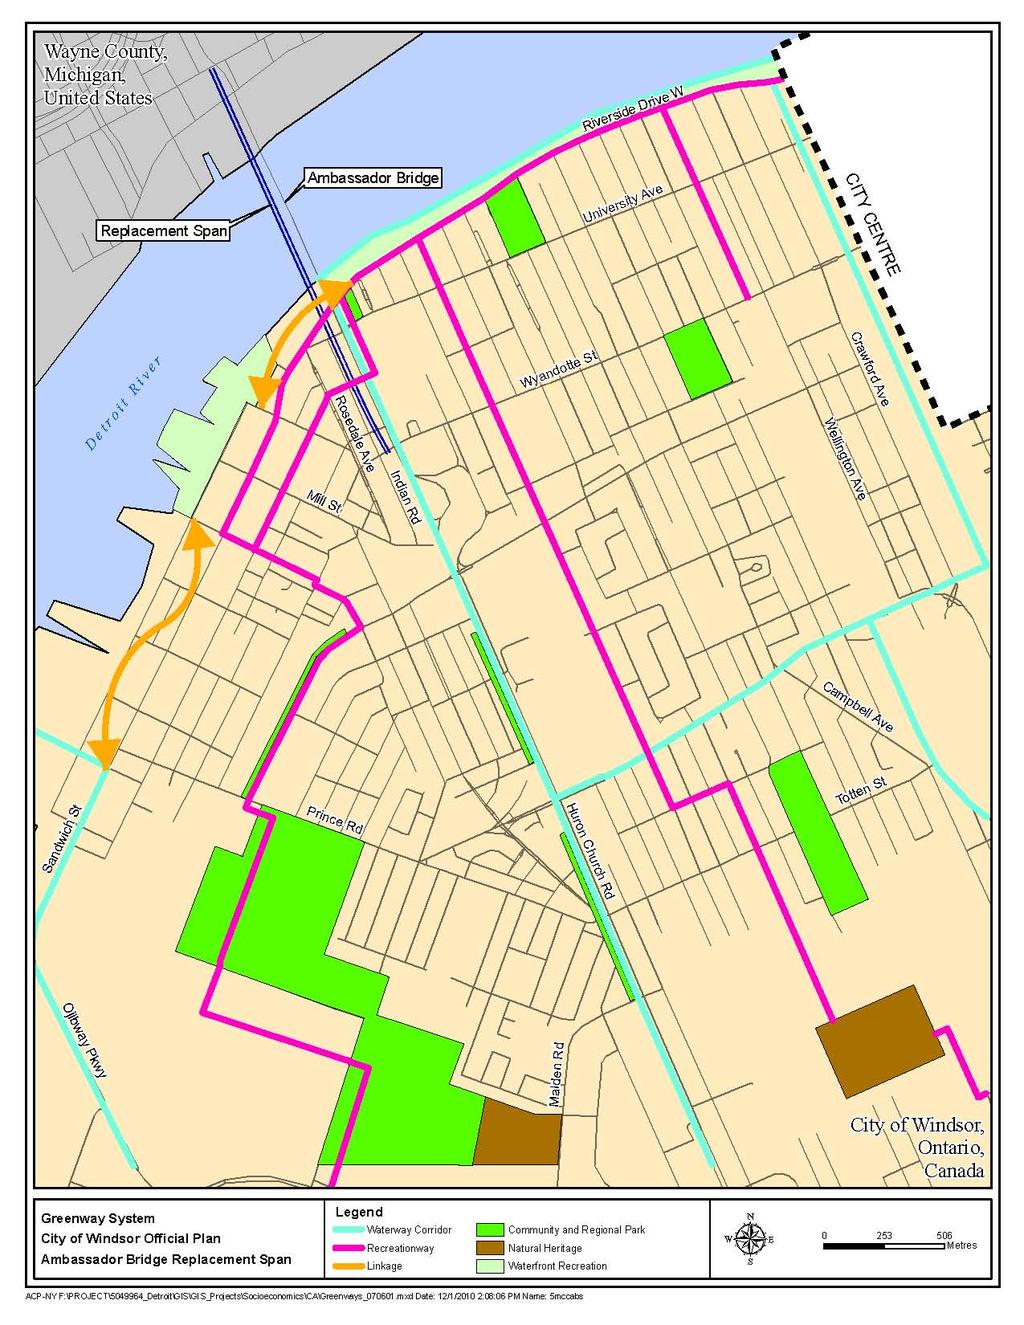 FIGURE 1: OFFICIAL PLAN GREENWAY SYSTEM